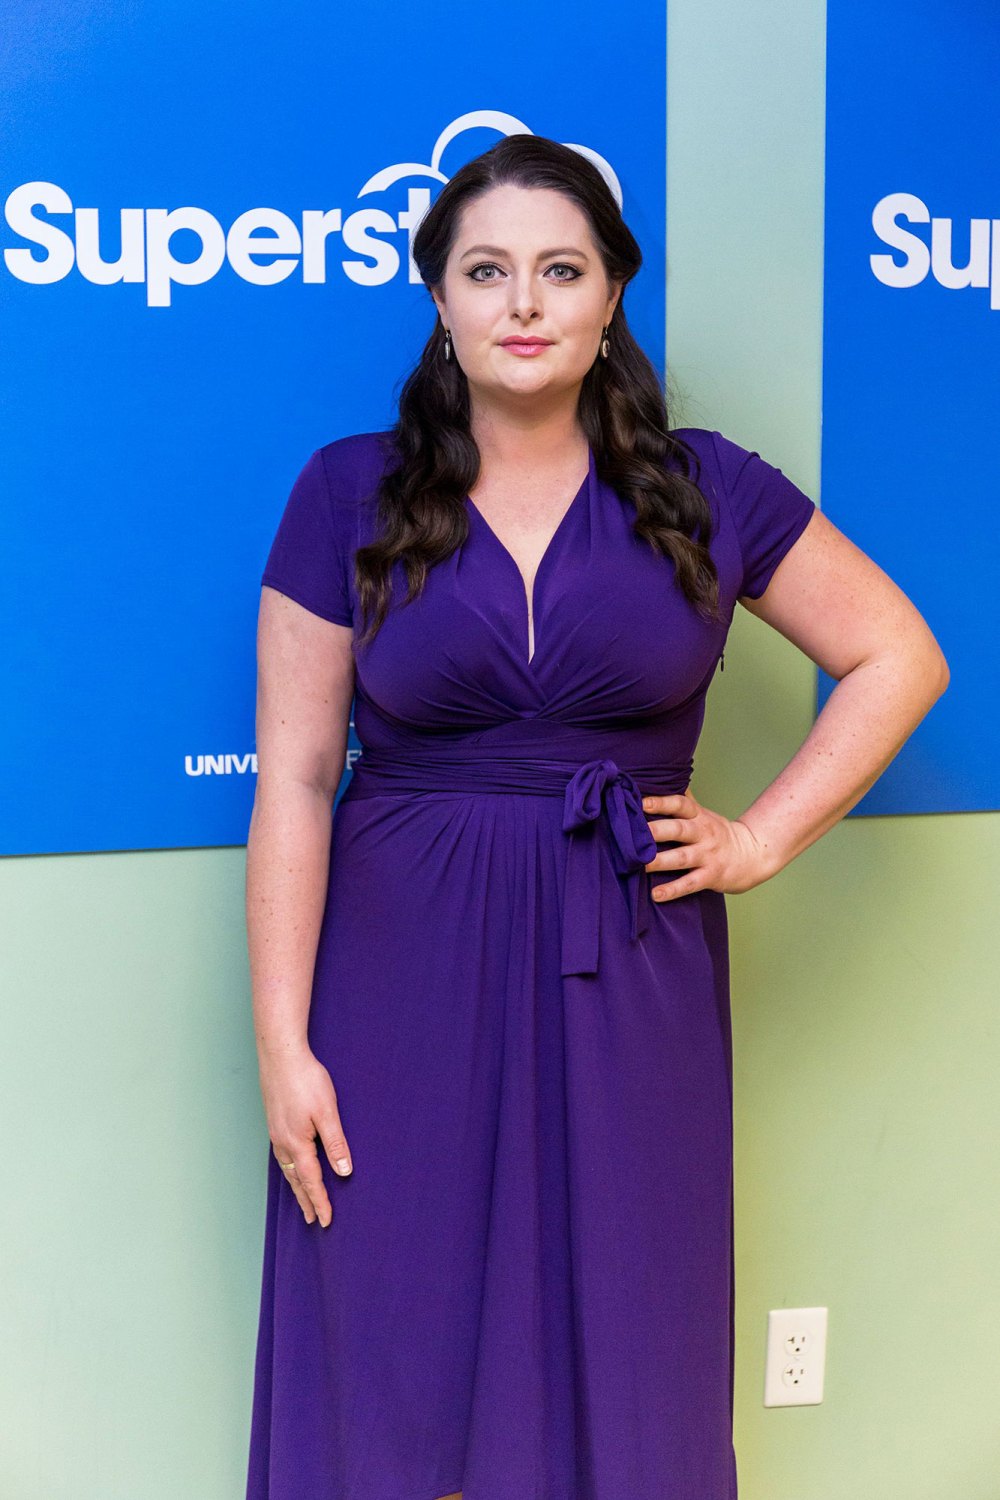 Superstore’s Lauren Ash: Dina Needs to Wear the Cop Costume a Third Time